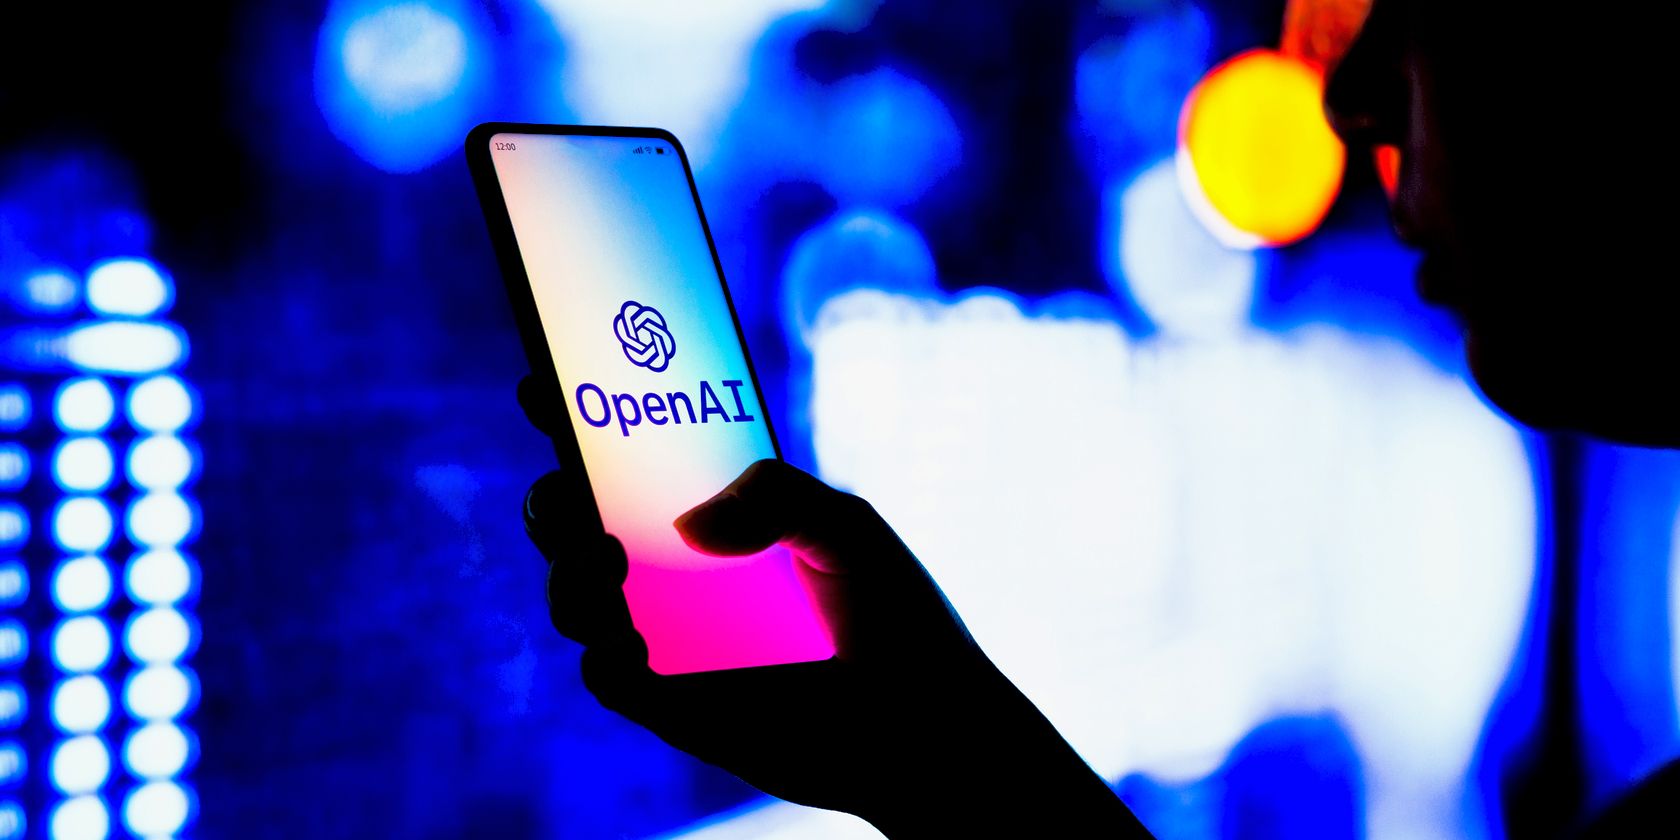 openai logo on smartphone being held feature